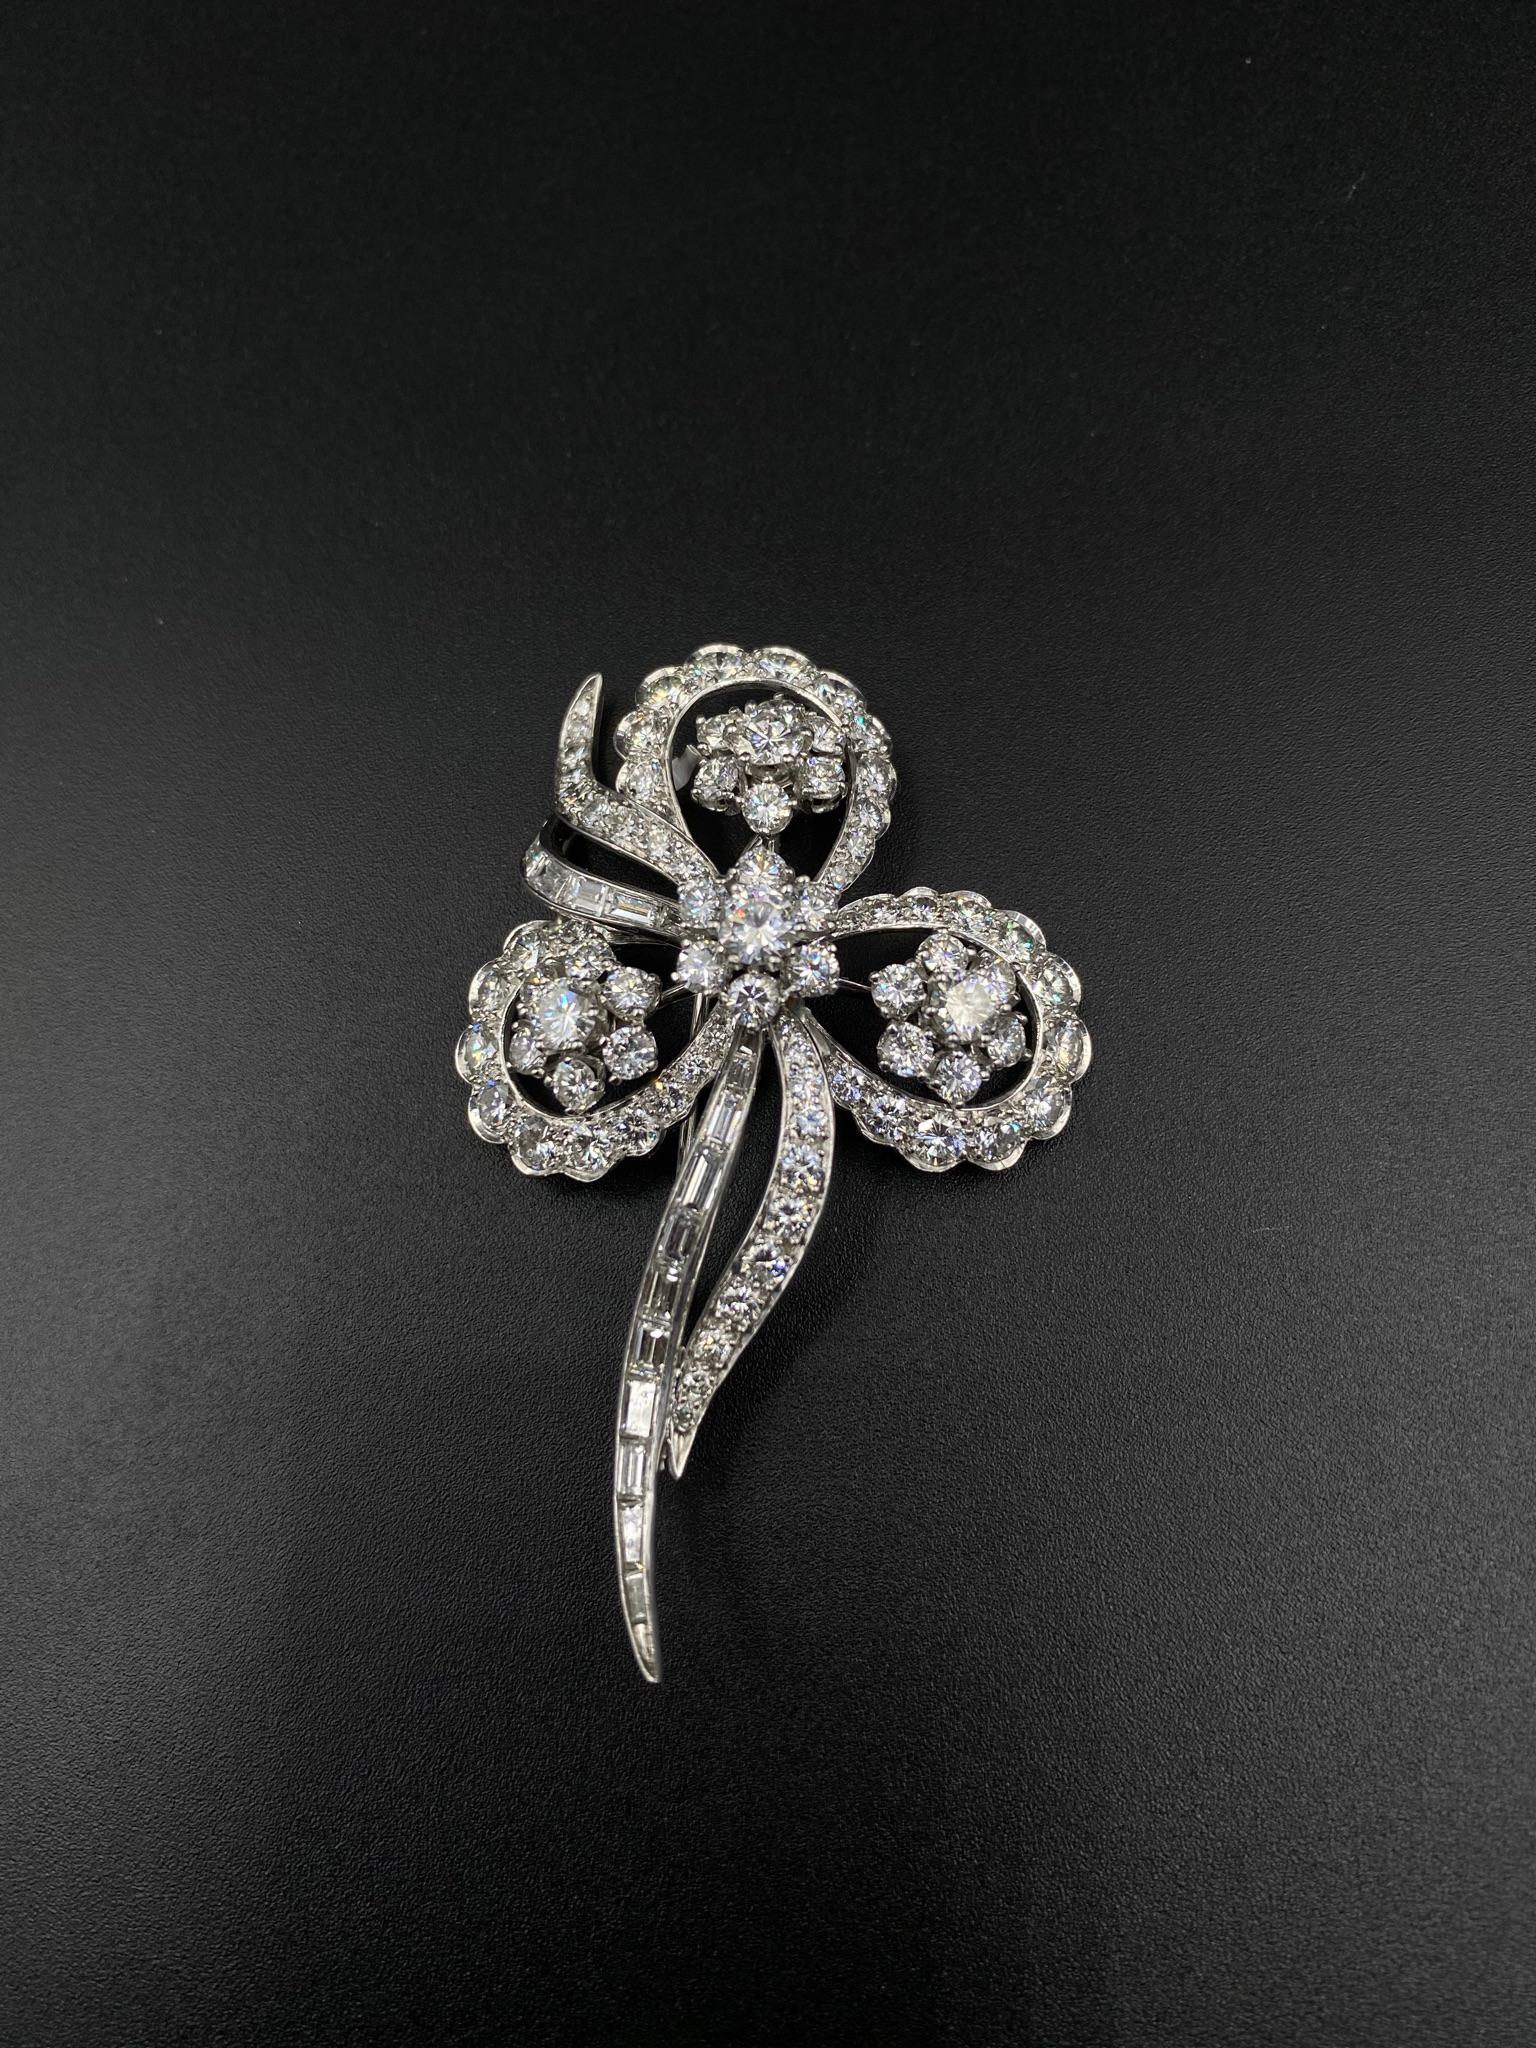 This exquisite Floral Art Deco Diamond Pin is a testament to timeless elegance. Crafted with precision in platinum, it features an enchanting Old European Cut Diamond at its center, radiating with vintage charm. The intricate floral design adds a